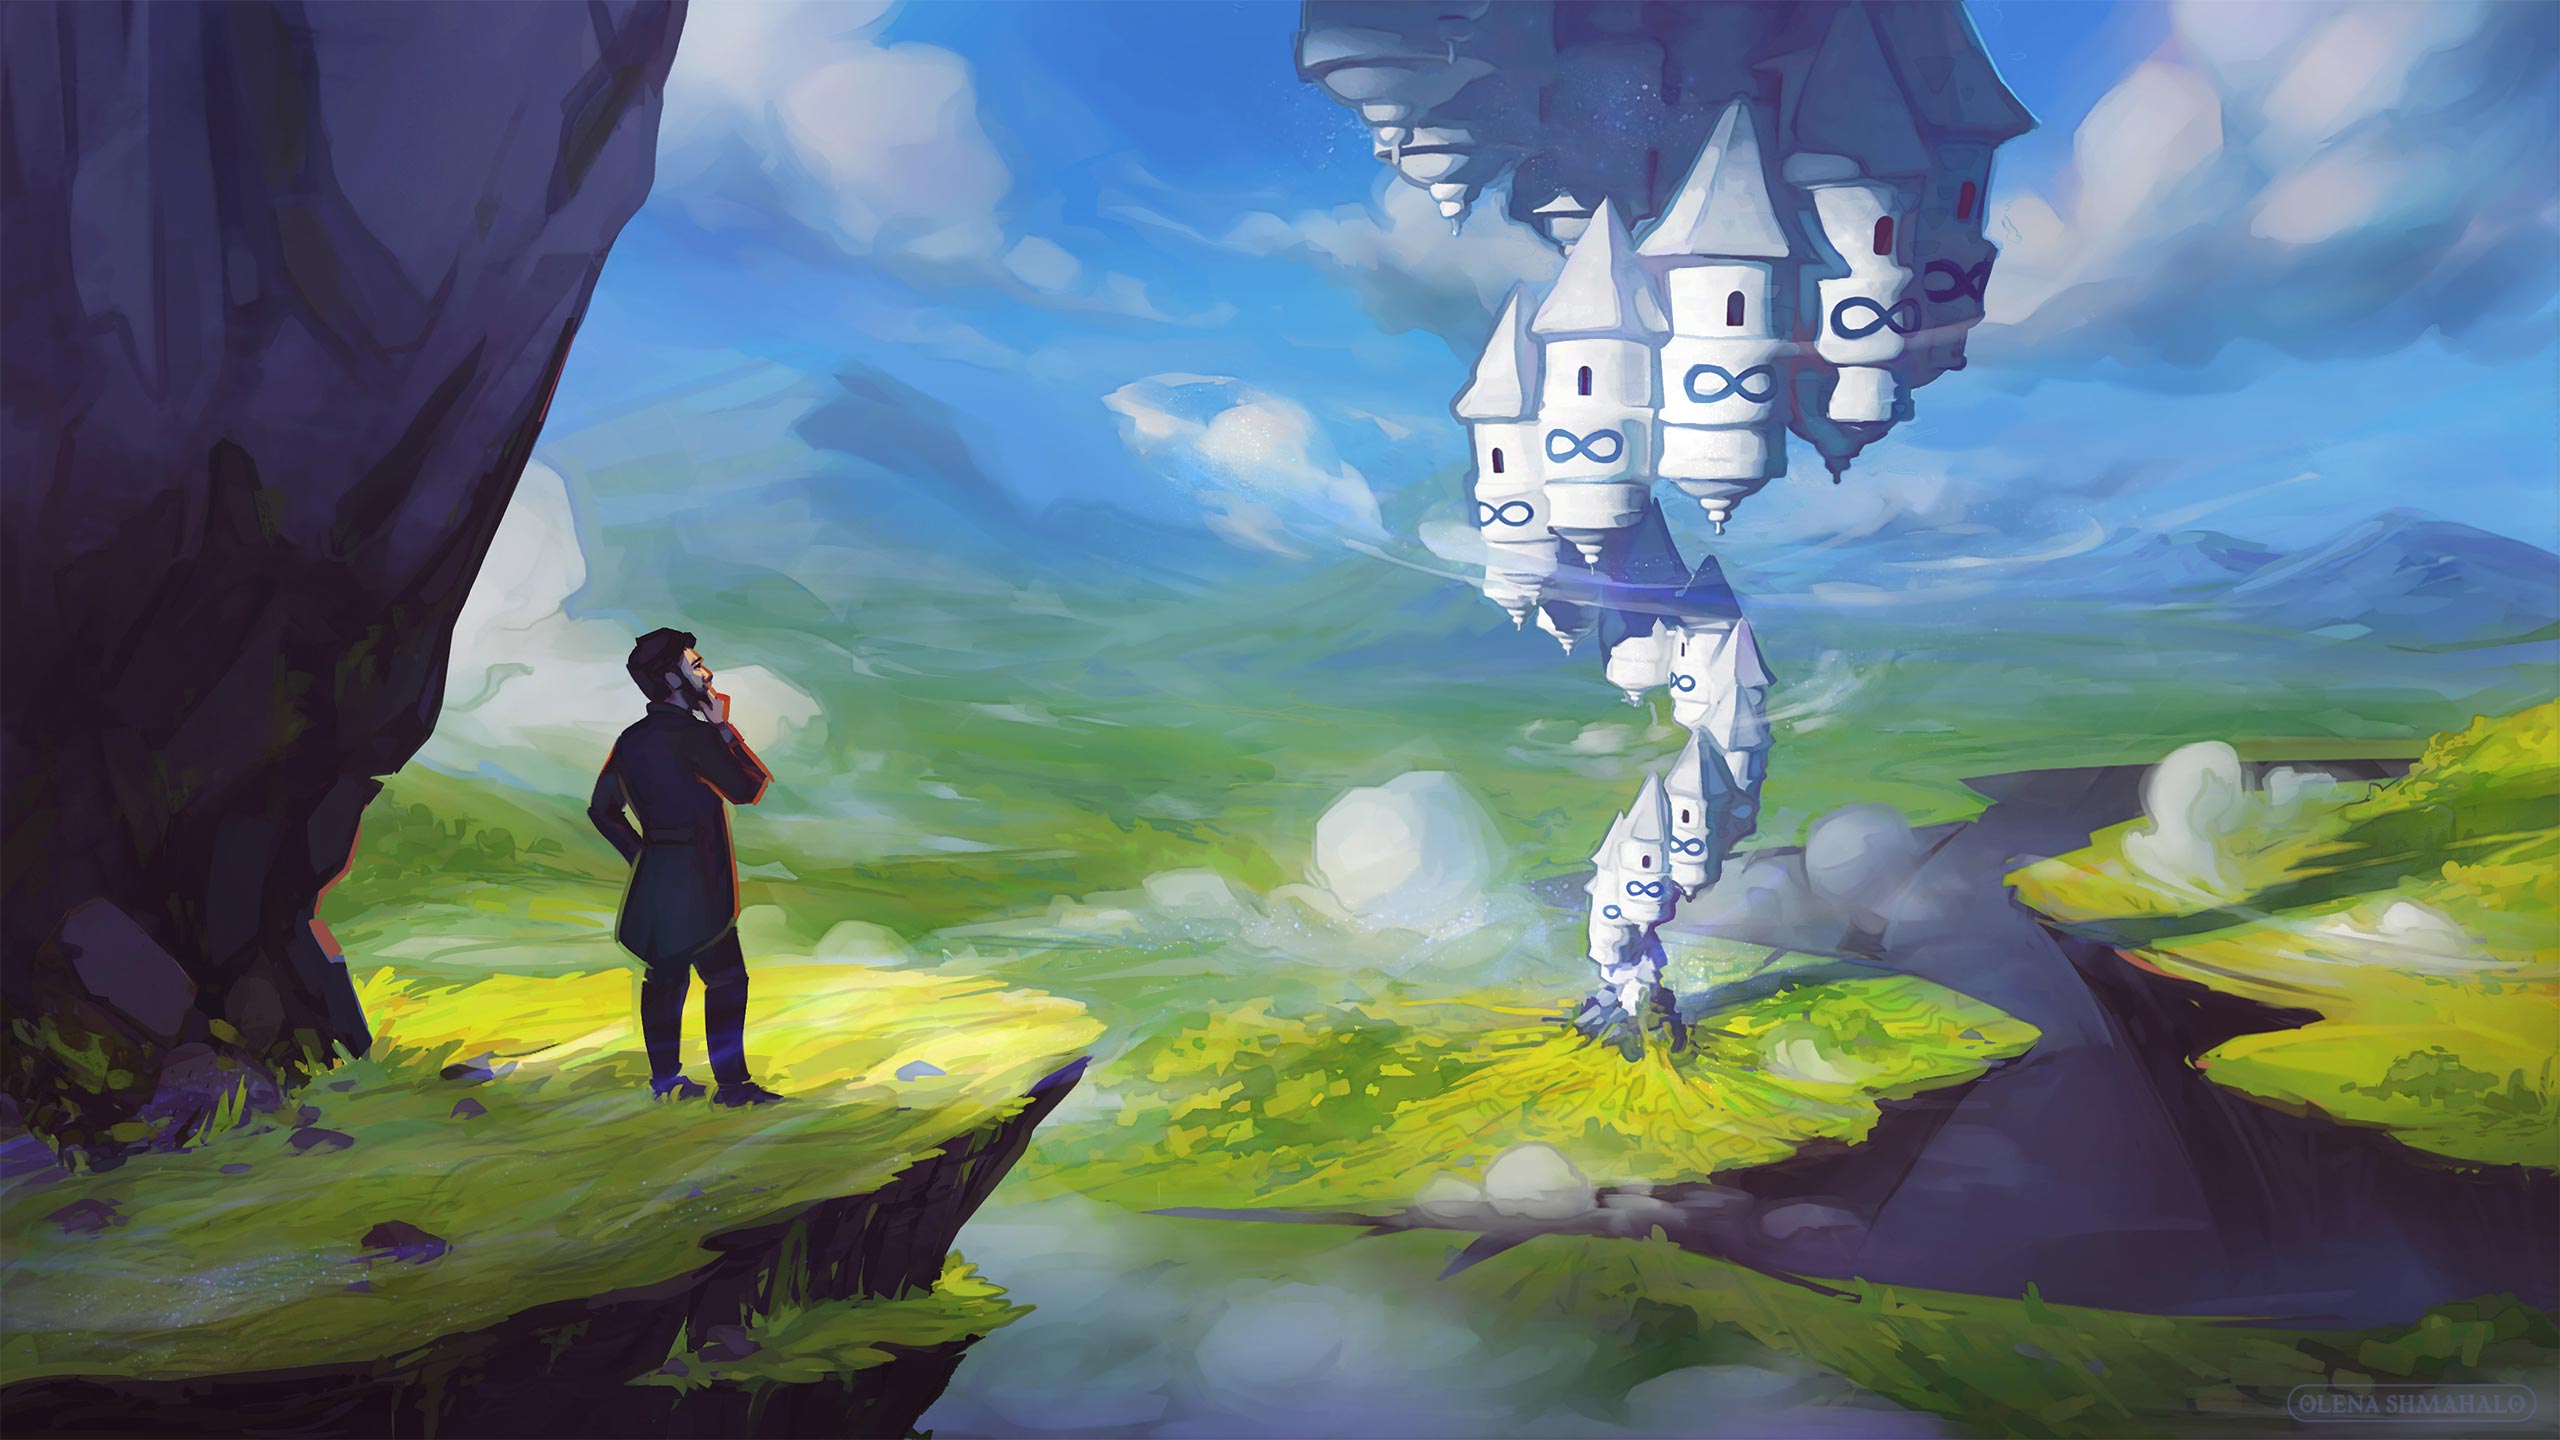 Stylized painting: Georg Cantor standing on a clieff, pondering an ever-rising, infinite tower in a fantastical landscape.